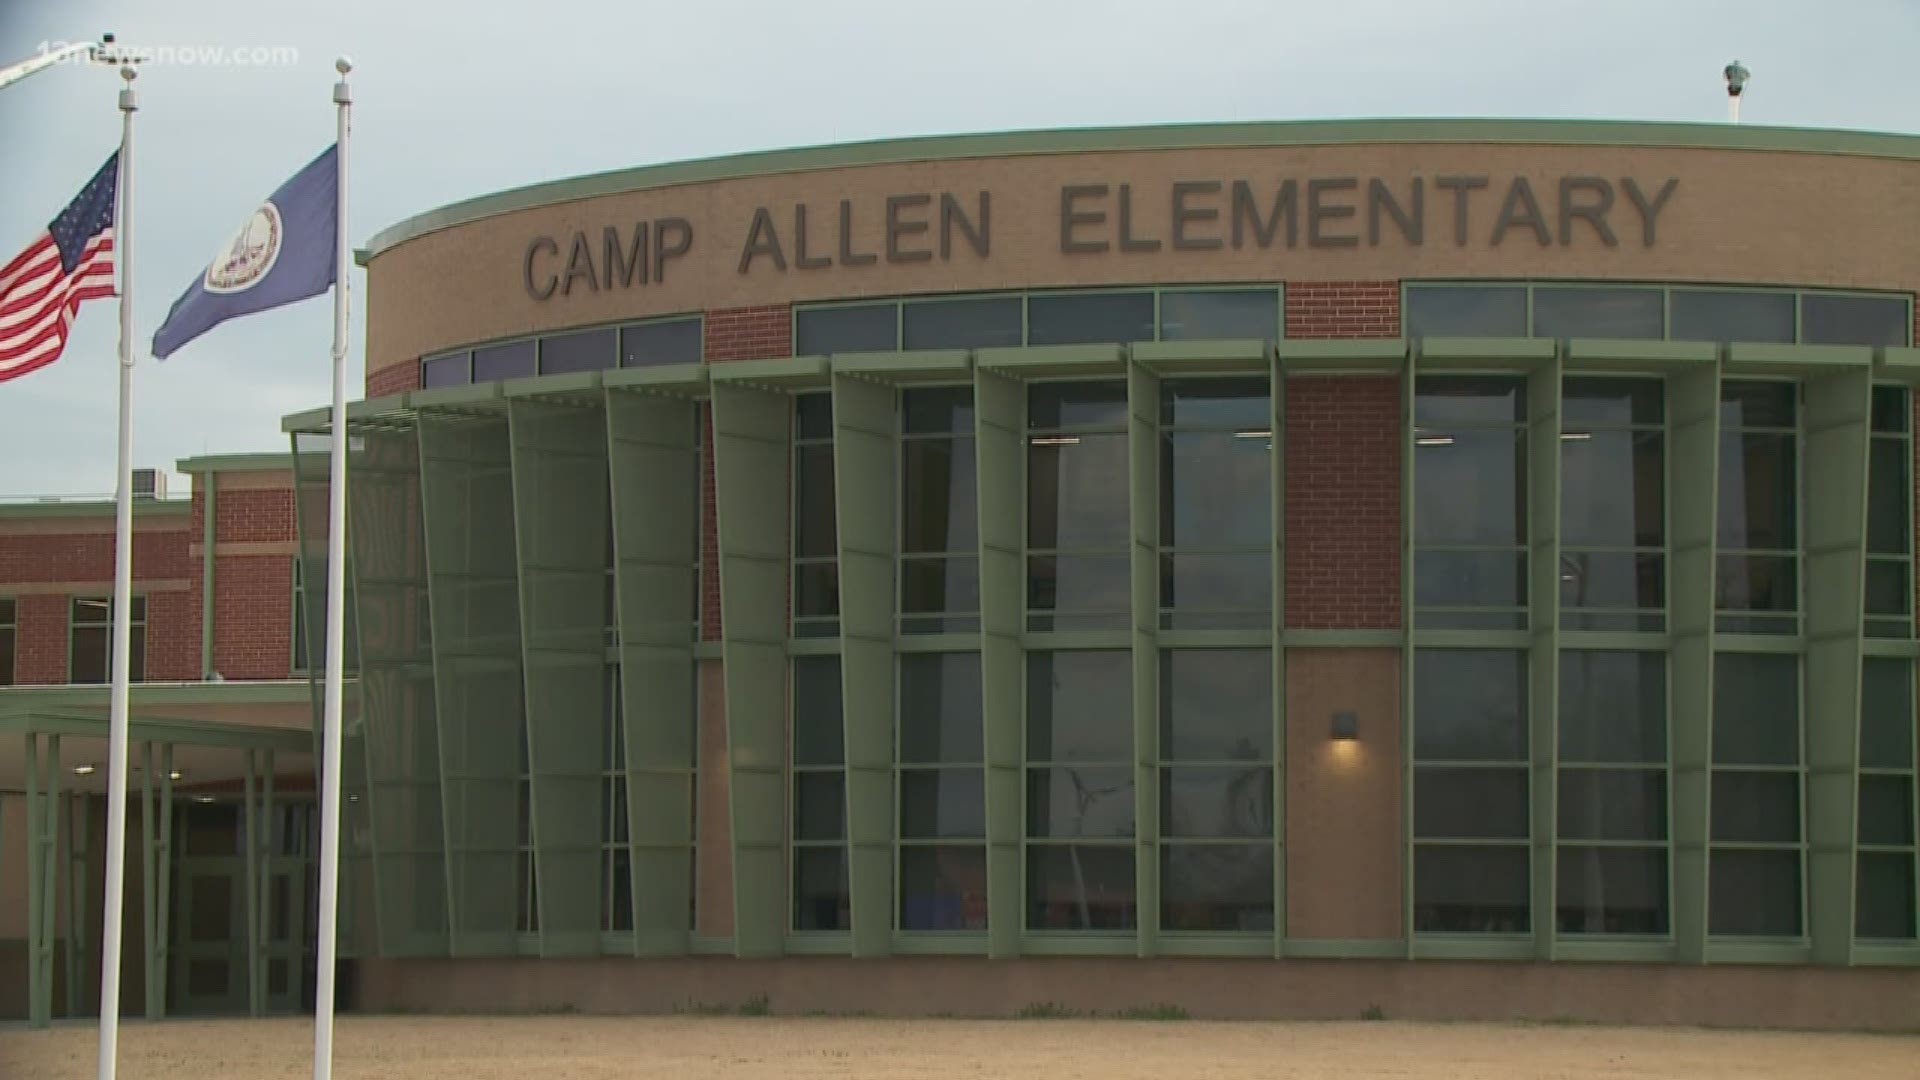 13News Now Megan Shinn was at the dedication ceremony for Camp Allen Elementary School's new school building.